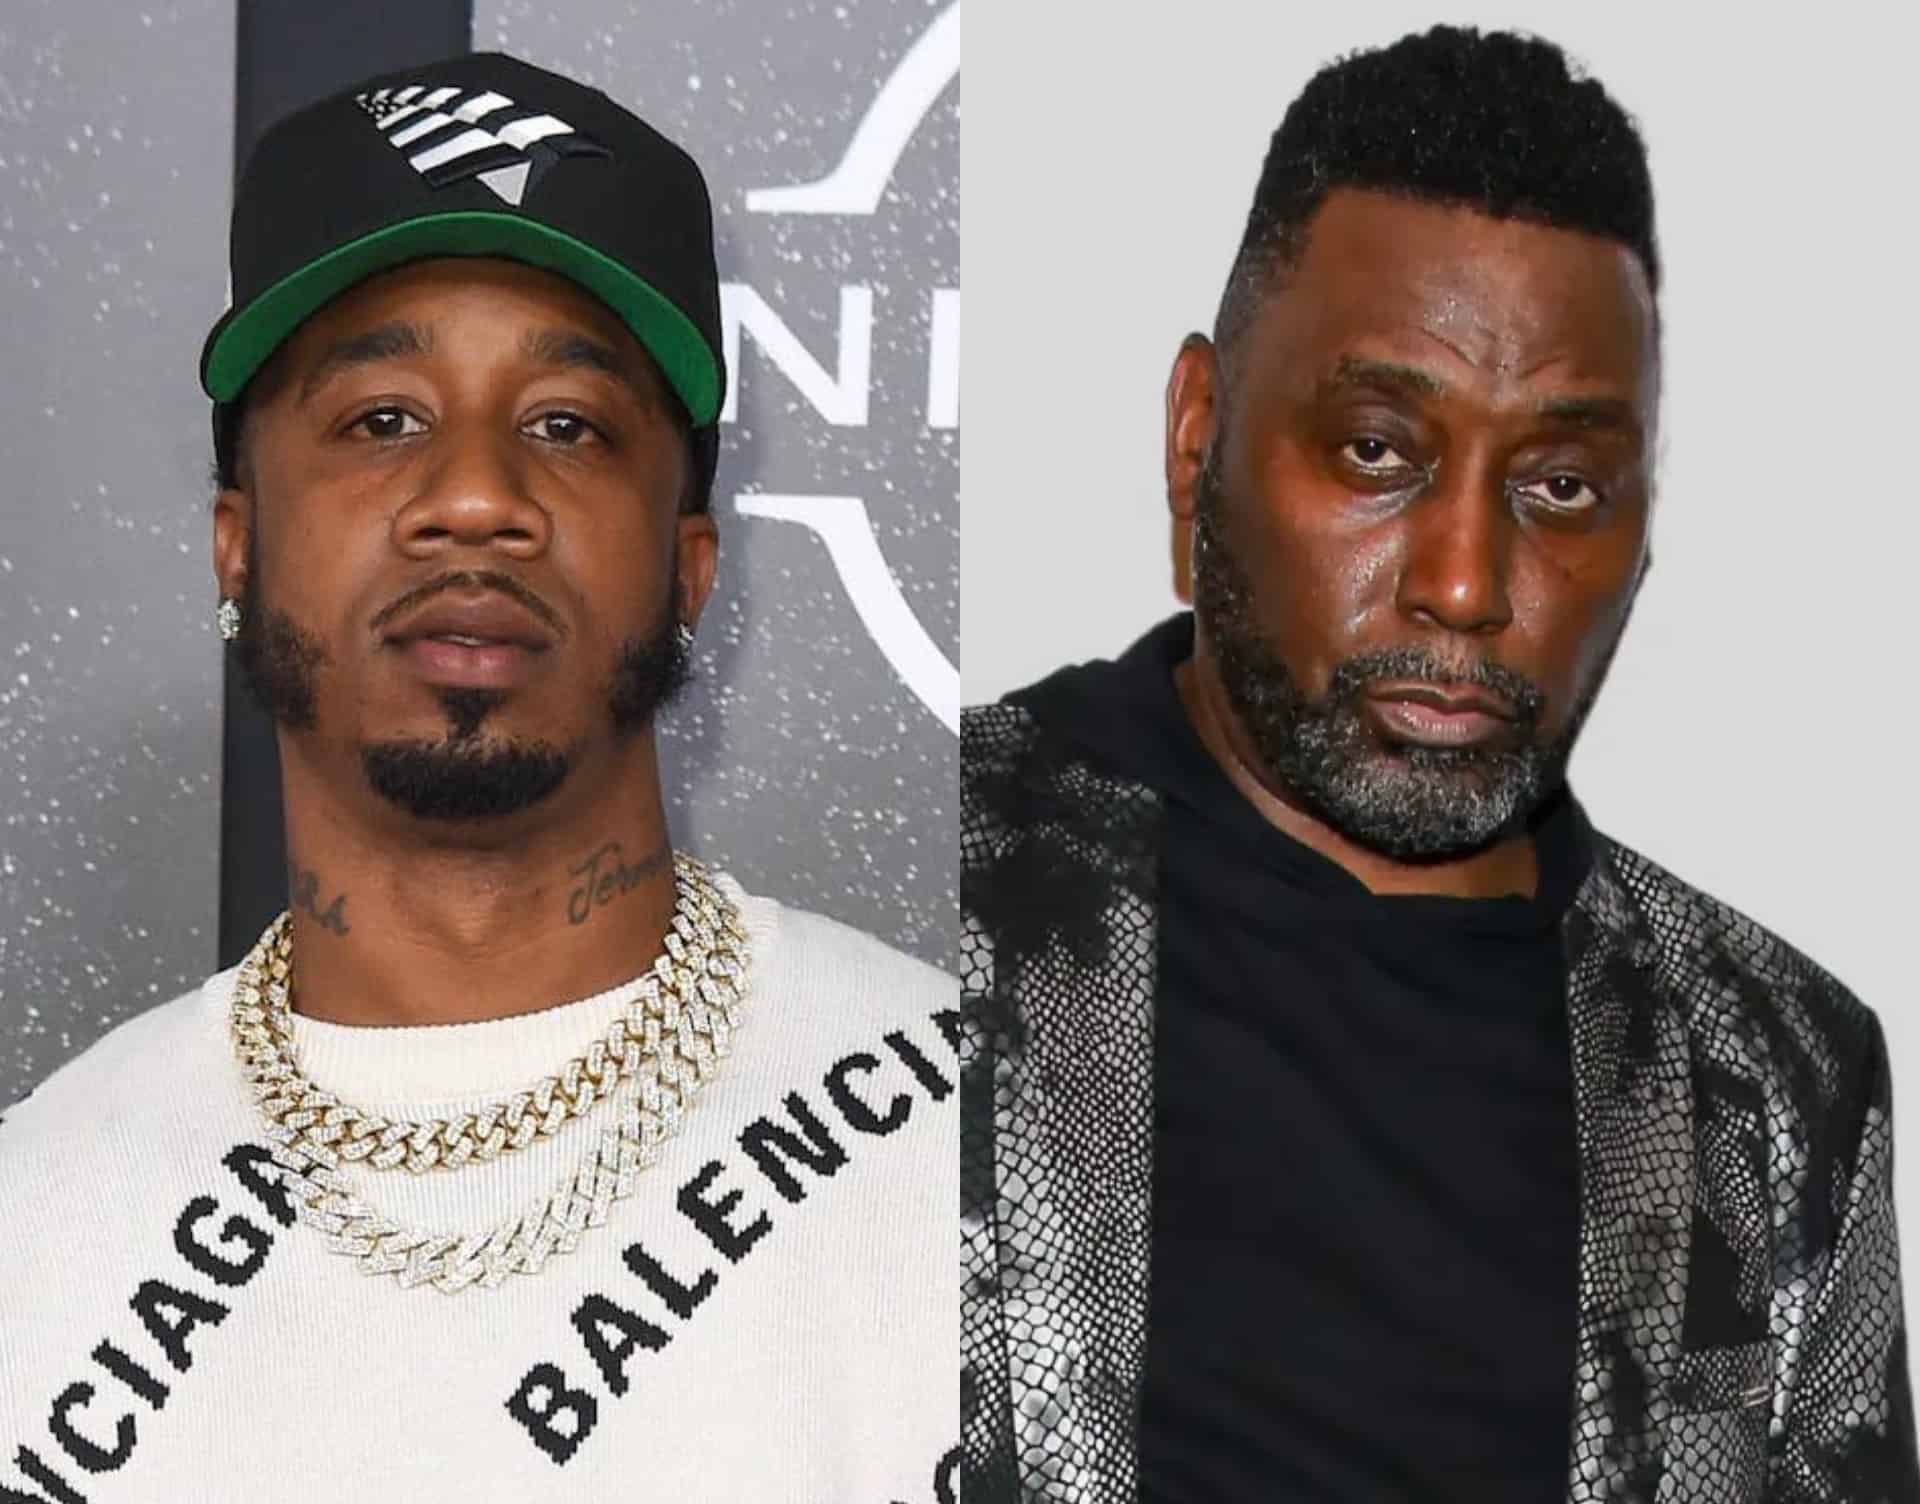 Benny The Butcher Reacts To Being Praised By Big Daddy Kane: "I'm Still Humble"